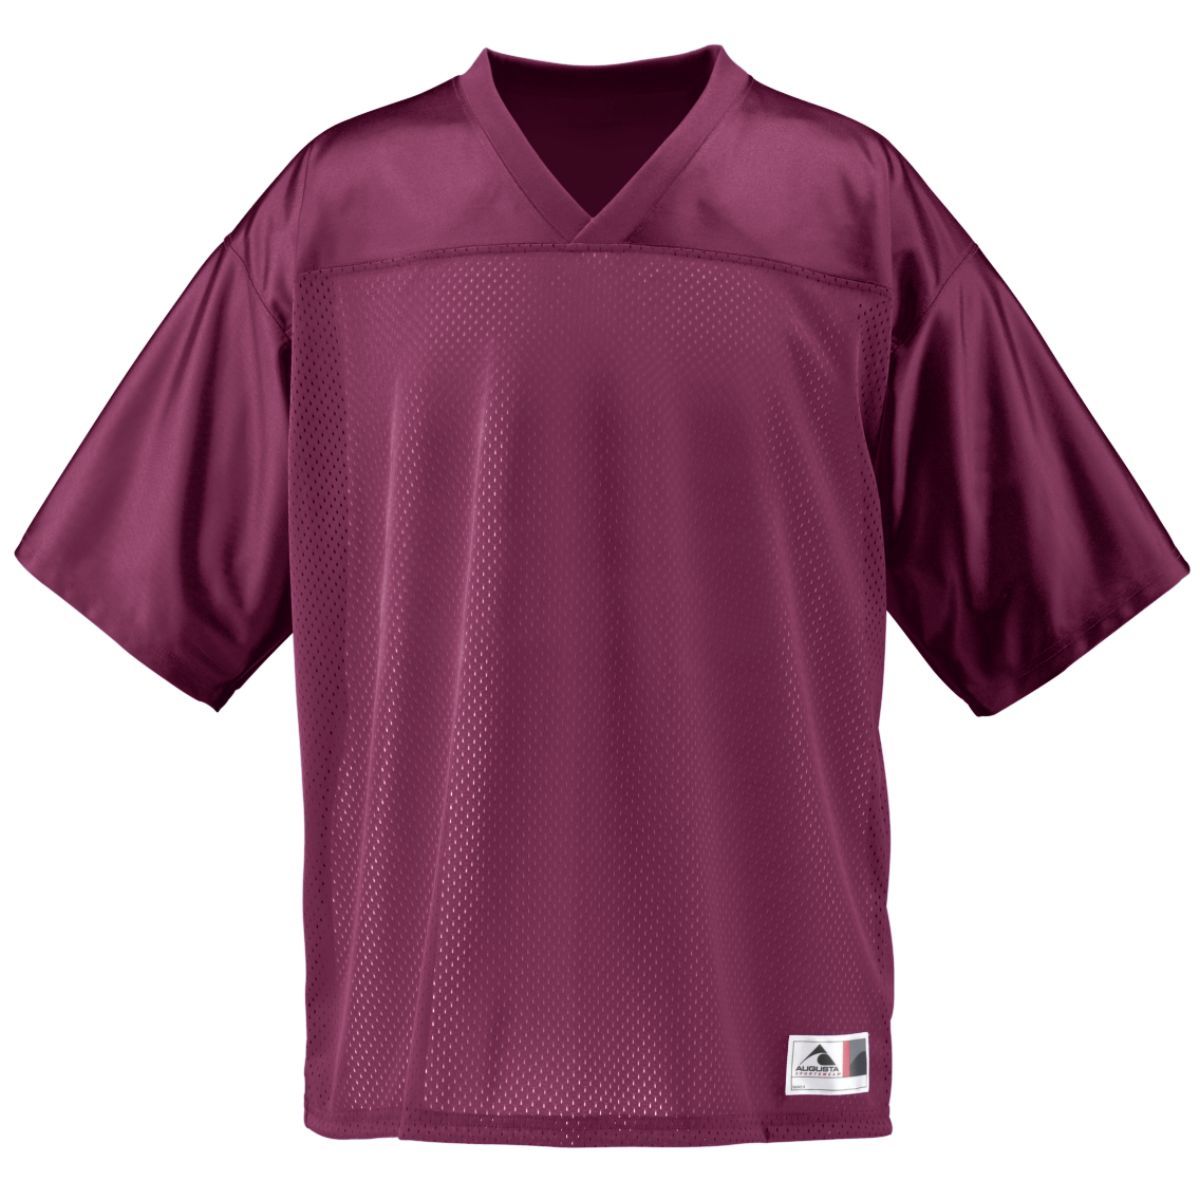 Augusta Sportswear Youth Stadium Replica Jersey in Maroon  -Part of the Youth, Youth-Jersey, Augusta-Products, Football, Shirts, All-Sports, All-Sports-1 product lines at KanaleyCreations.com